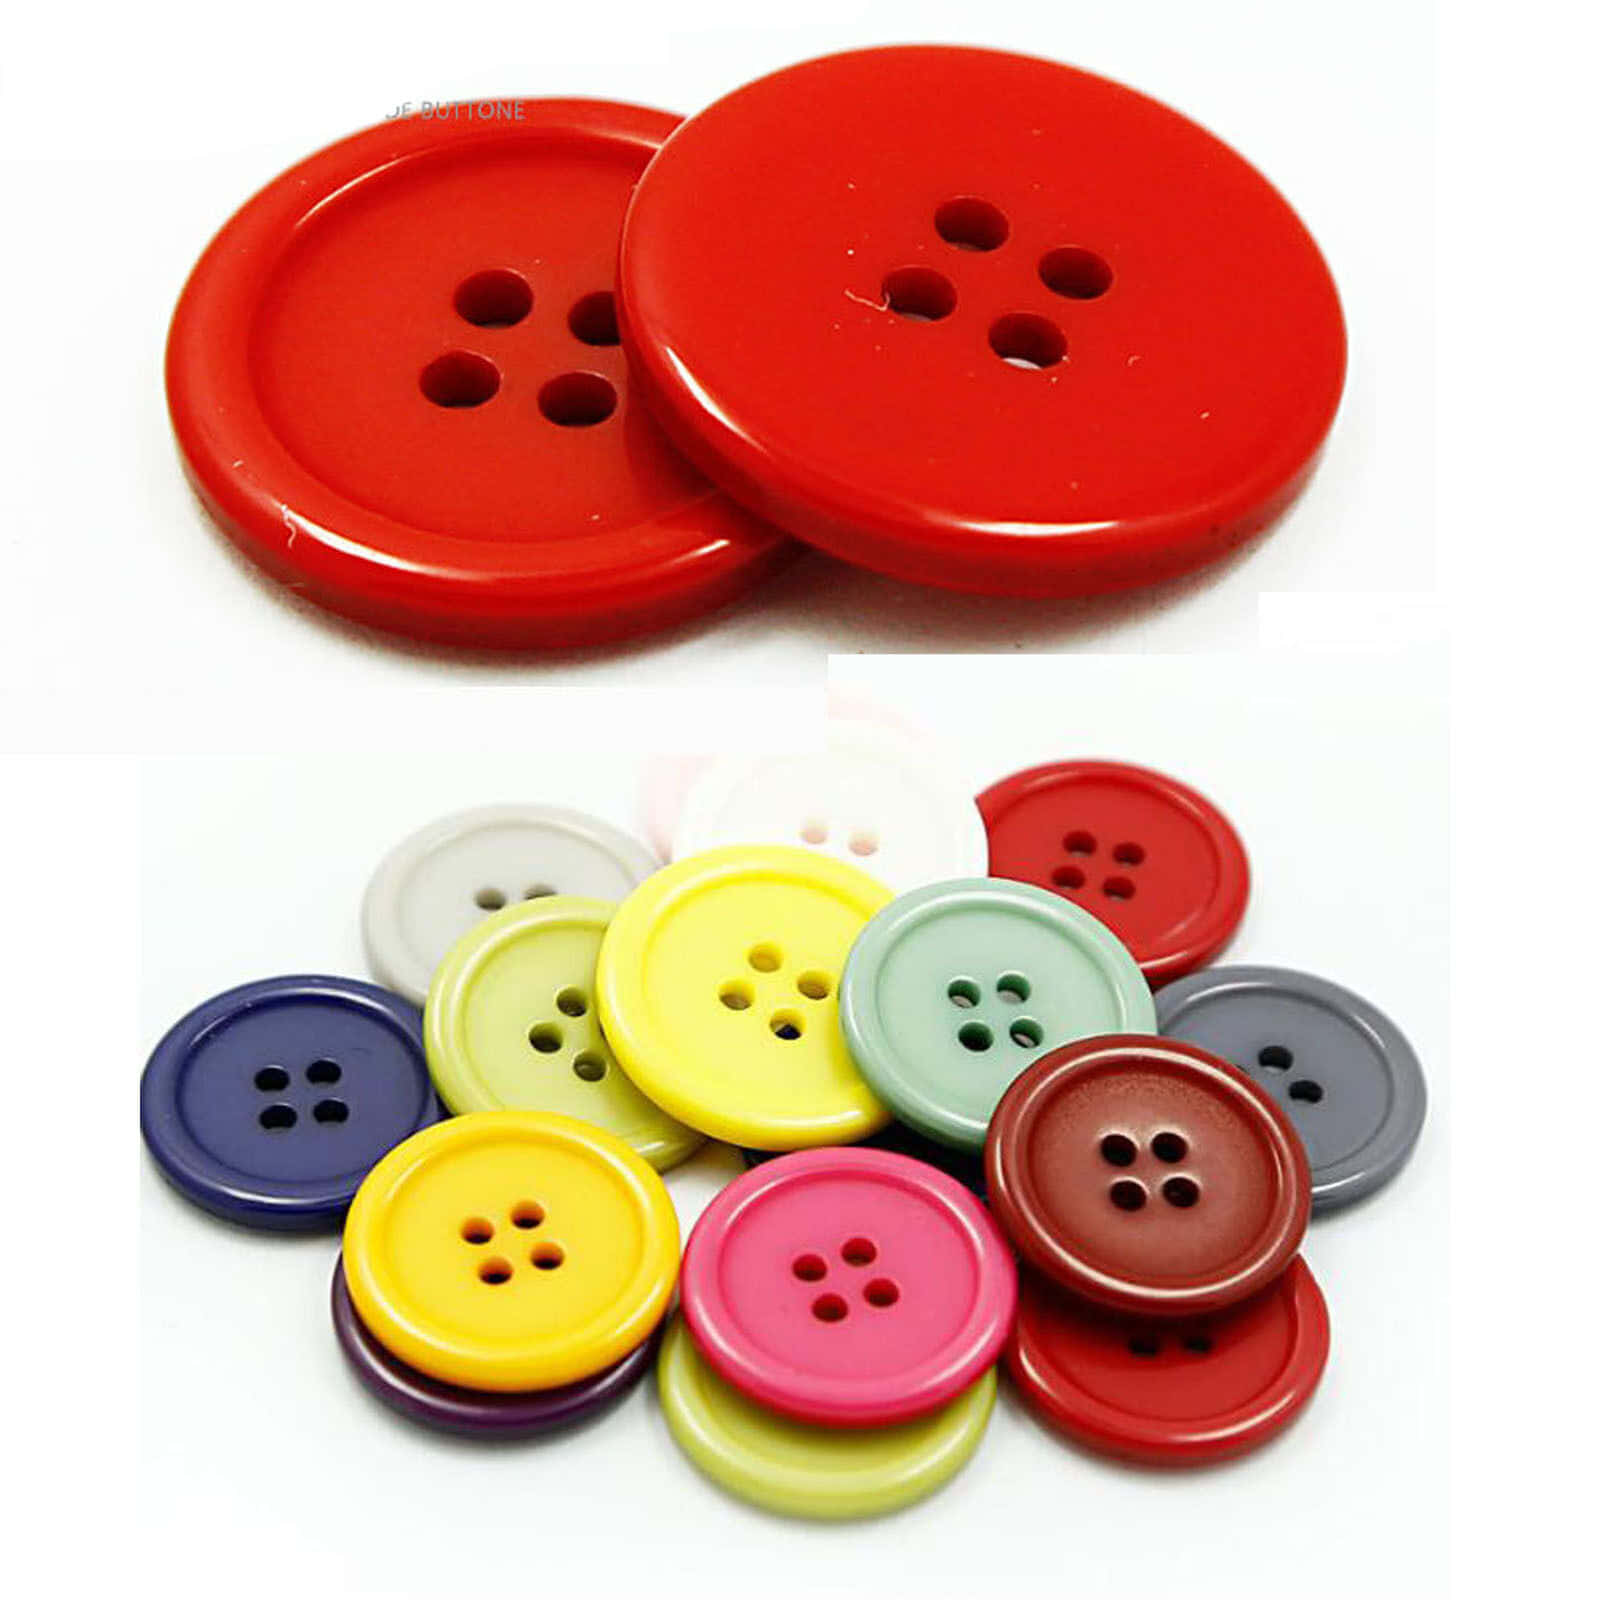 Image  A collection of buttons with different colors and shapes